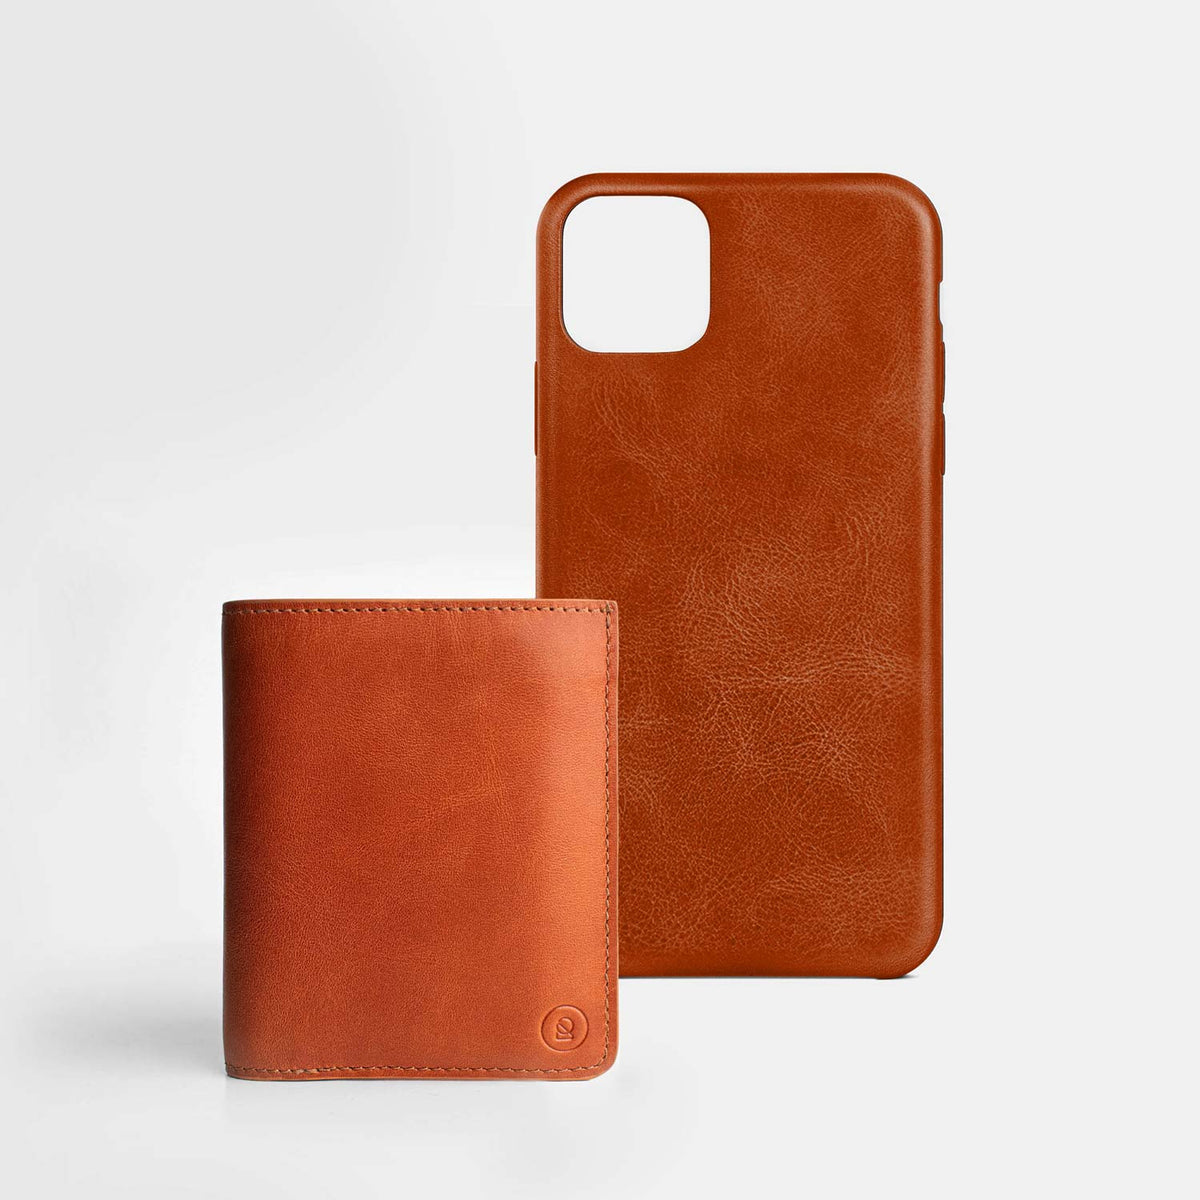 Leather iPhone 7/8 Shell Case - Saddle Brown - RYAN London